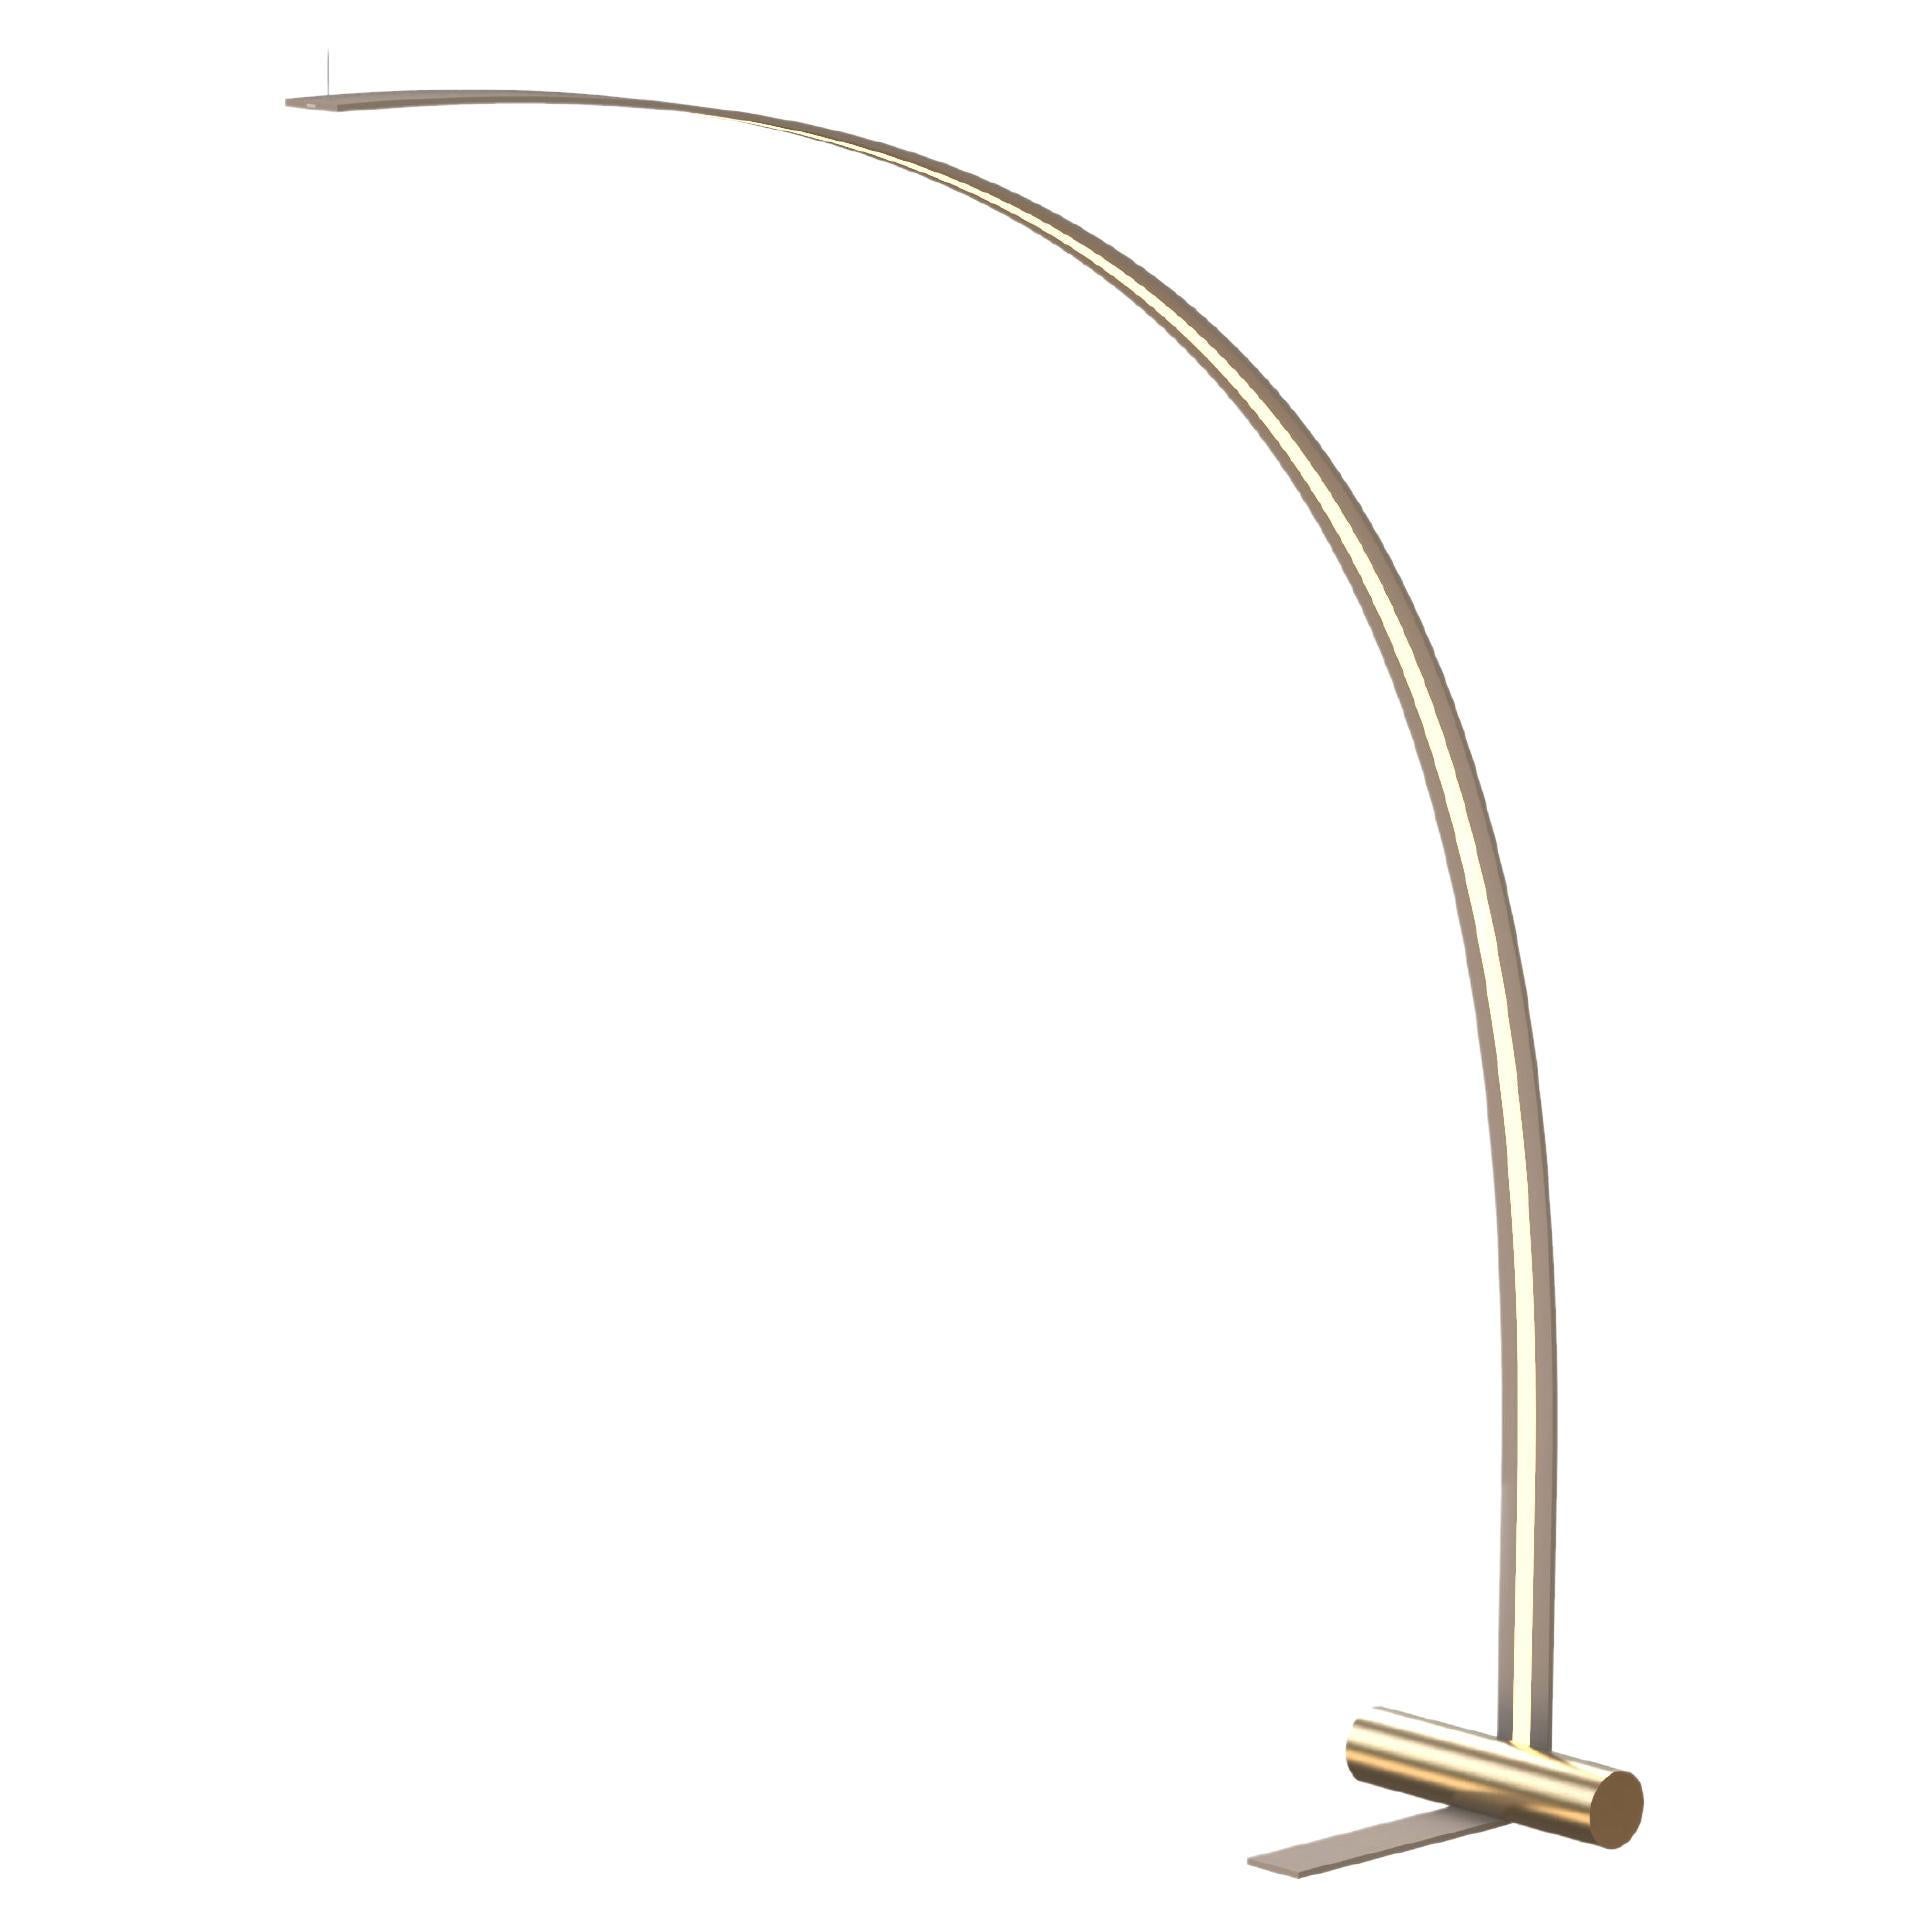 Lampadaire Modernity 'Nastro 563.64' by Studiopepe x Tooy, Beige & Brushed Brass en vente